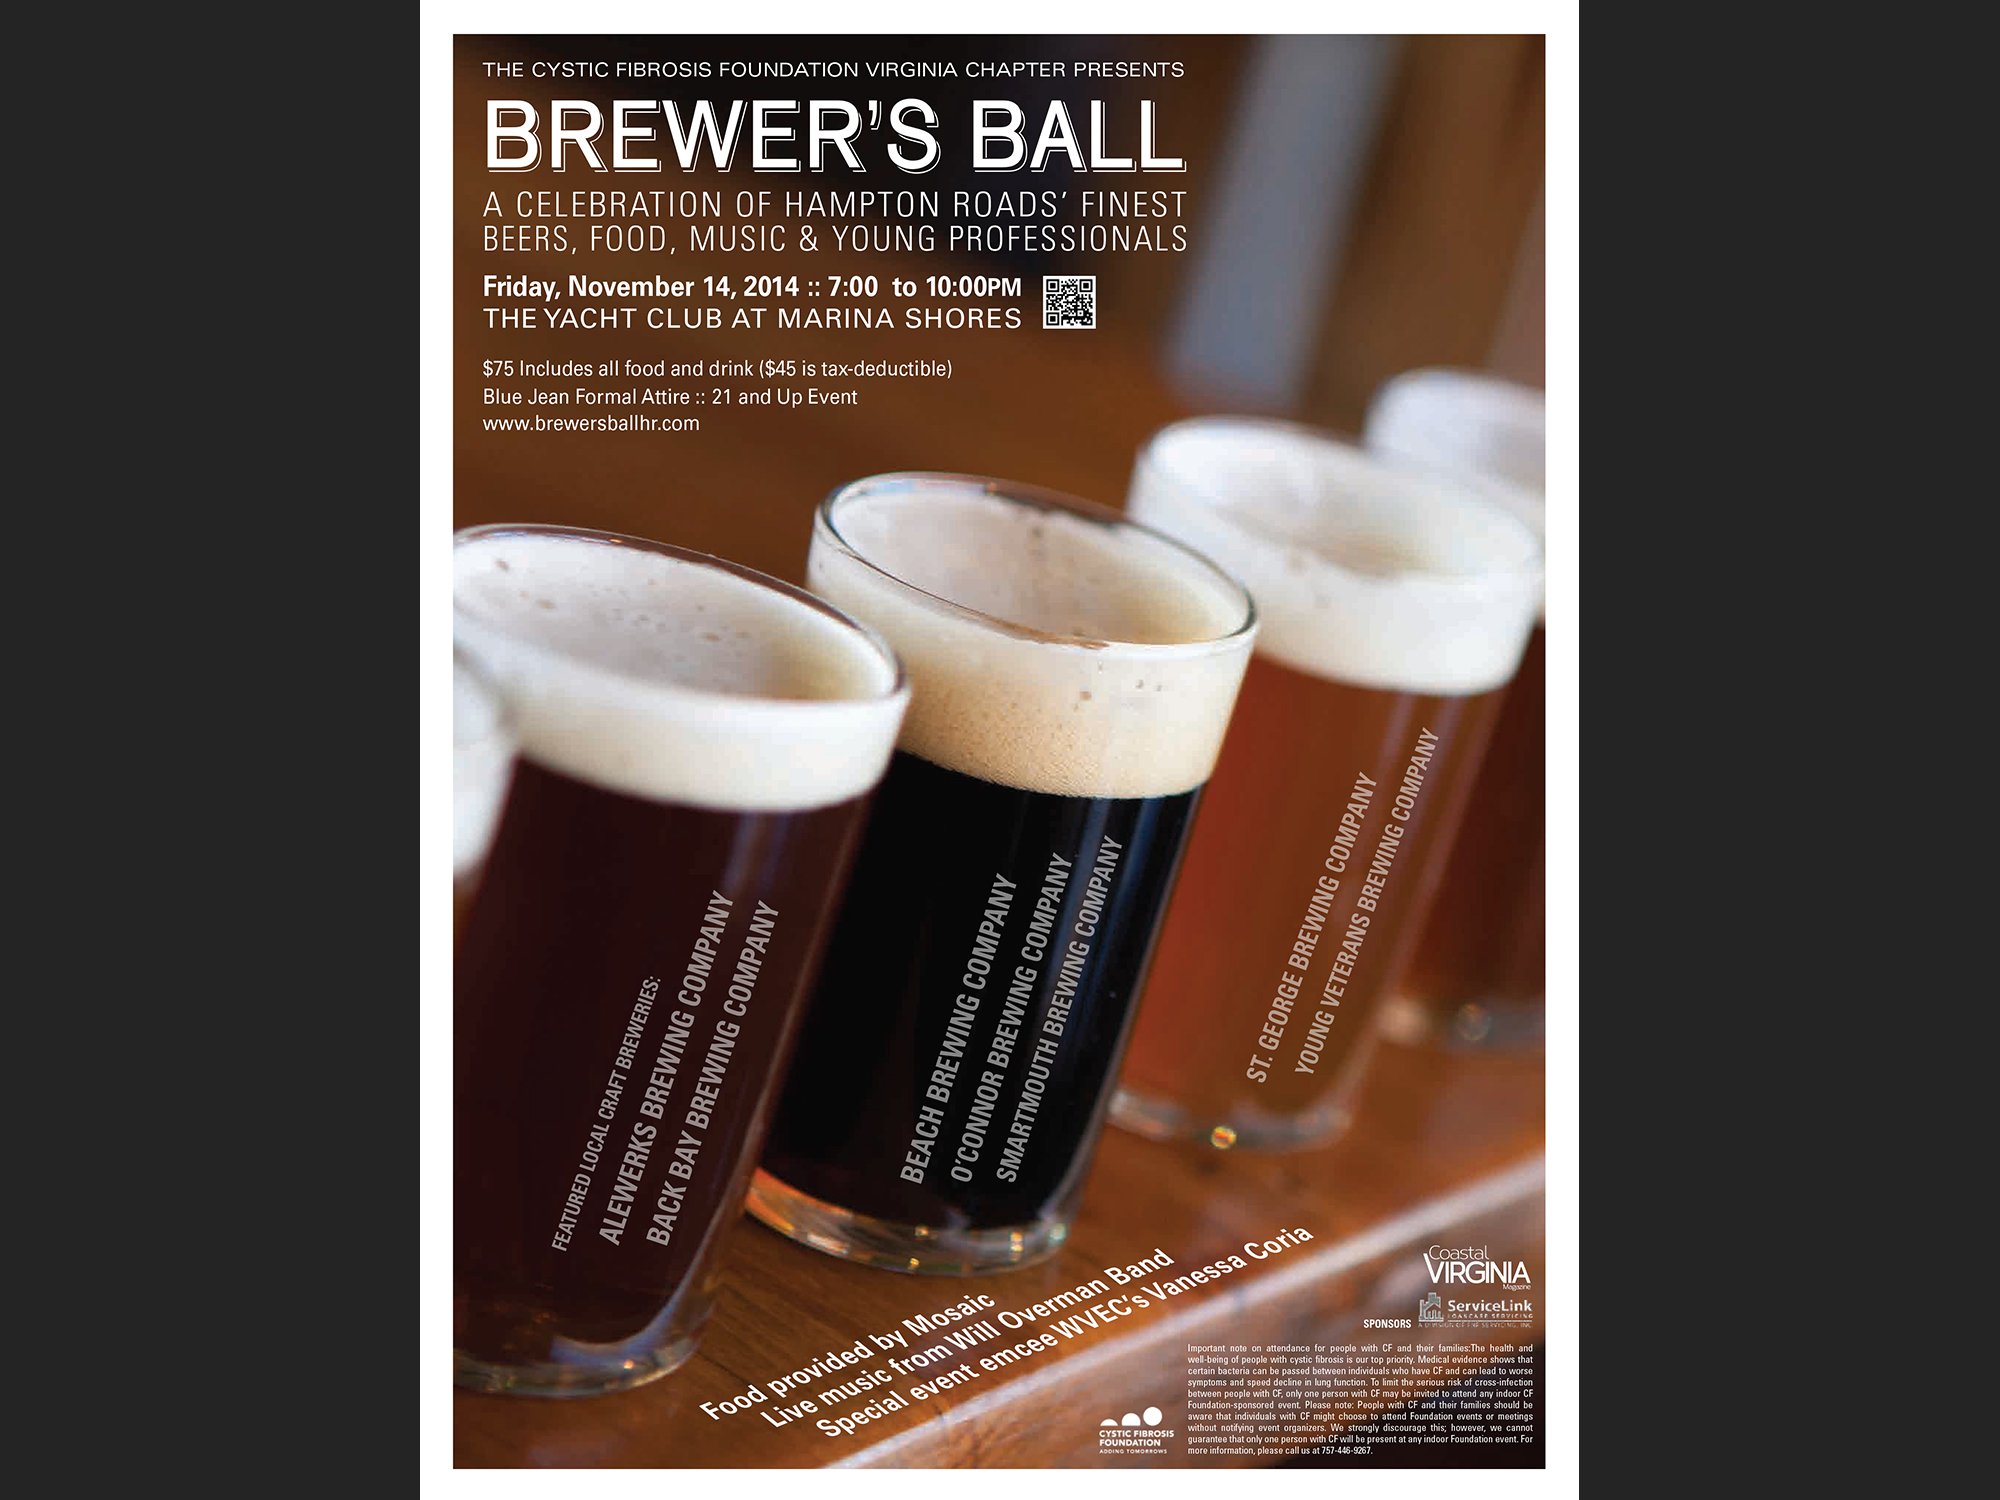 Brewer's Ball - Cystic Fibrosis Foundation, 2014; poster/flyer.